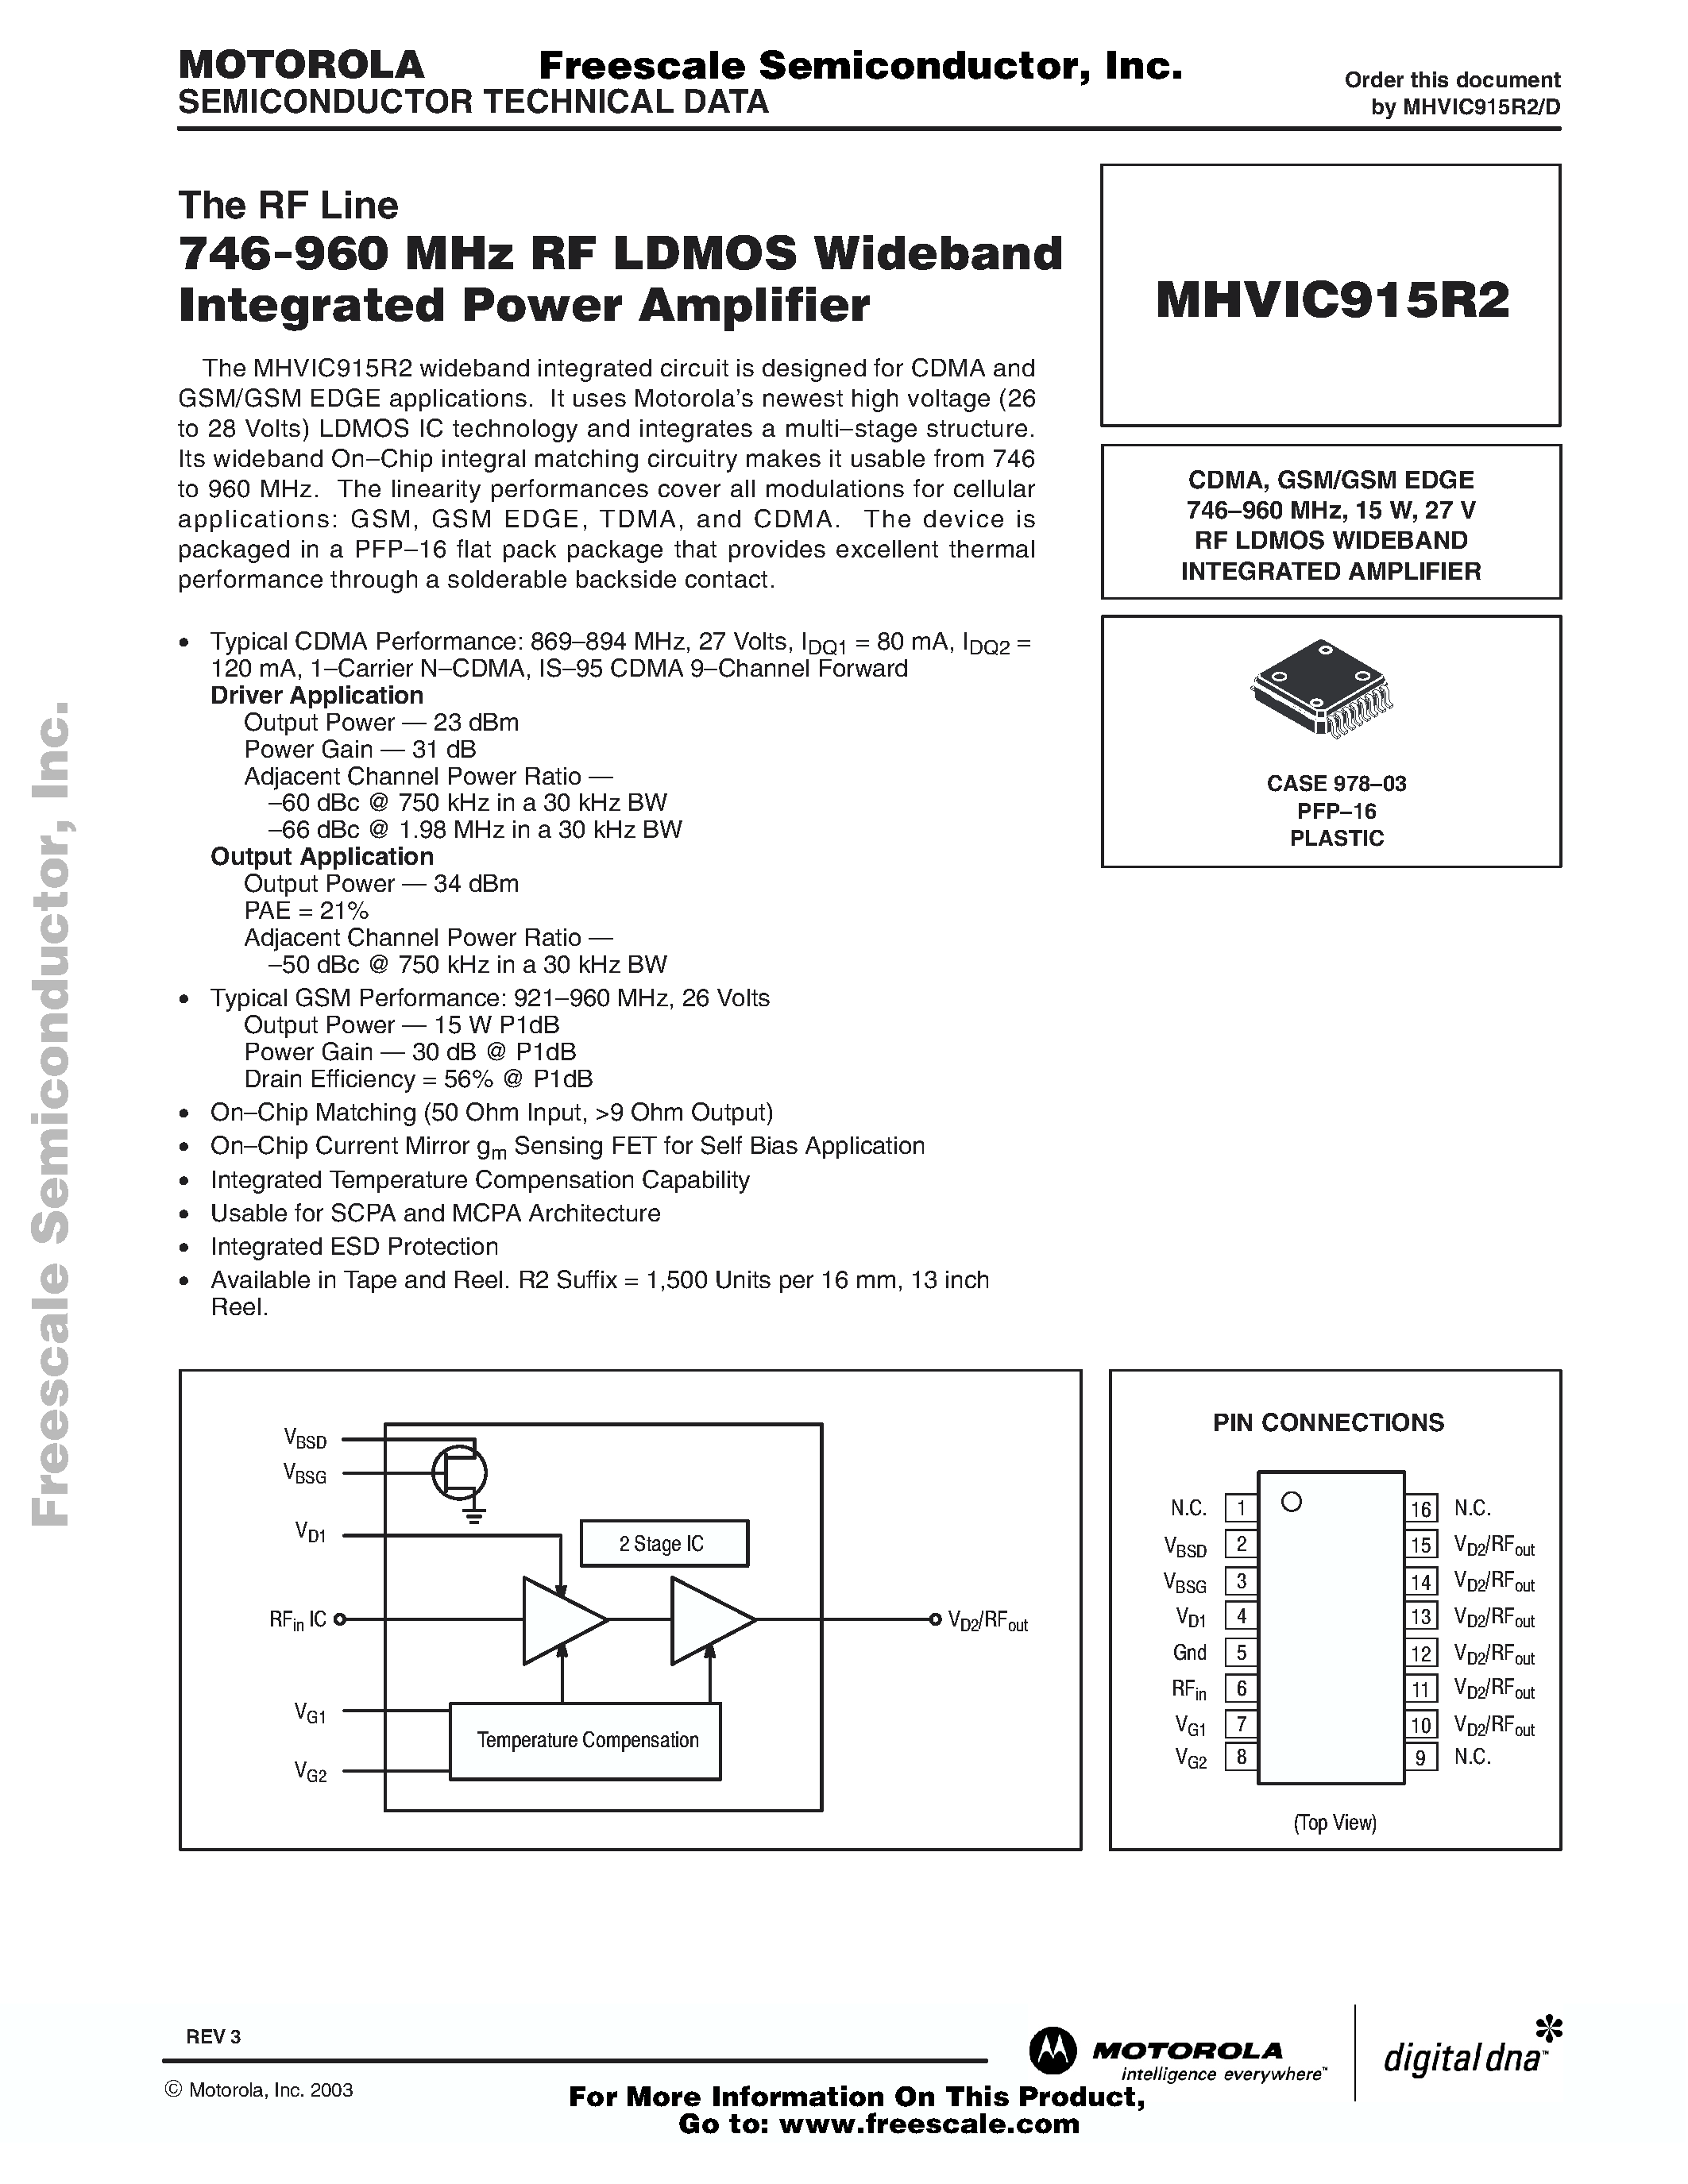 Даташит MHVIC915R2 - 746-960 MHz RF LDMOS Wideband Integrated Power Amplifier страница 1